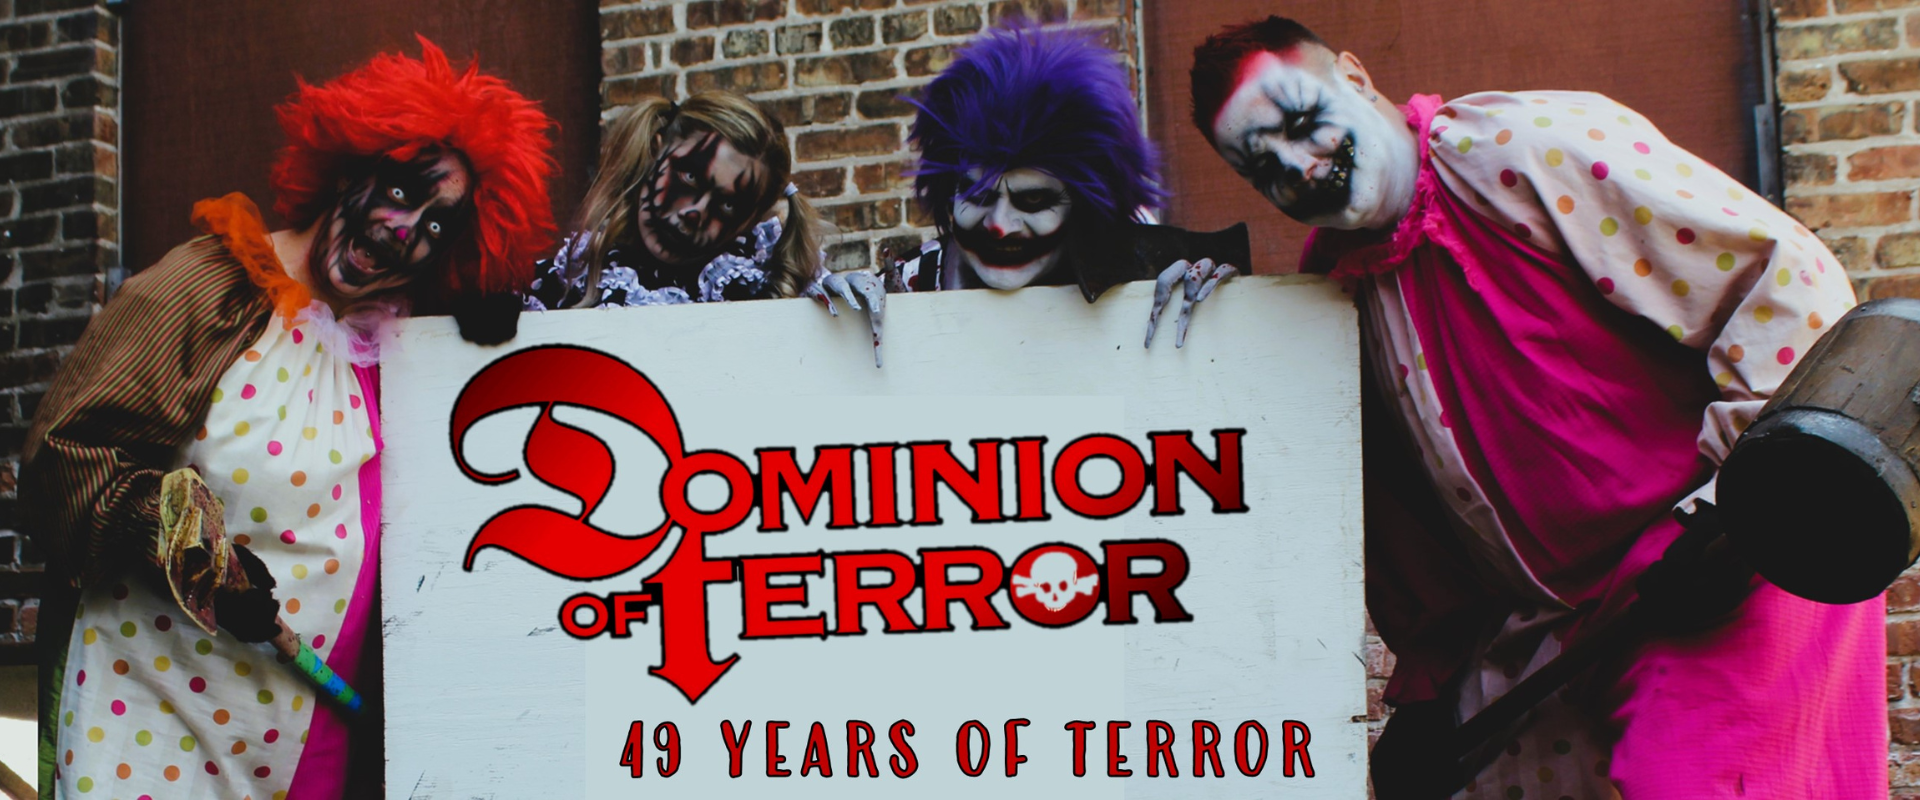 DOMINION OF TERRORS HAUNTED HOUSE WEBSITE HEADER